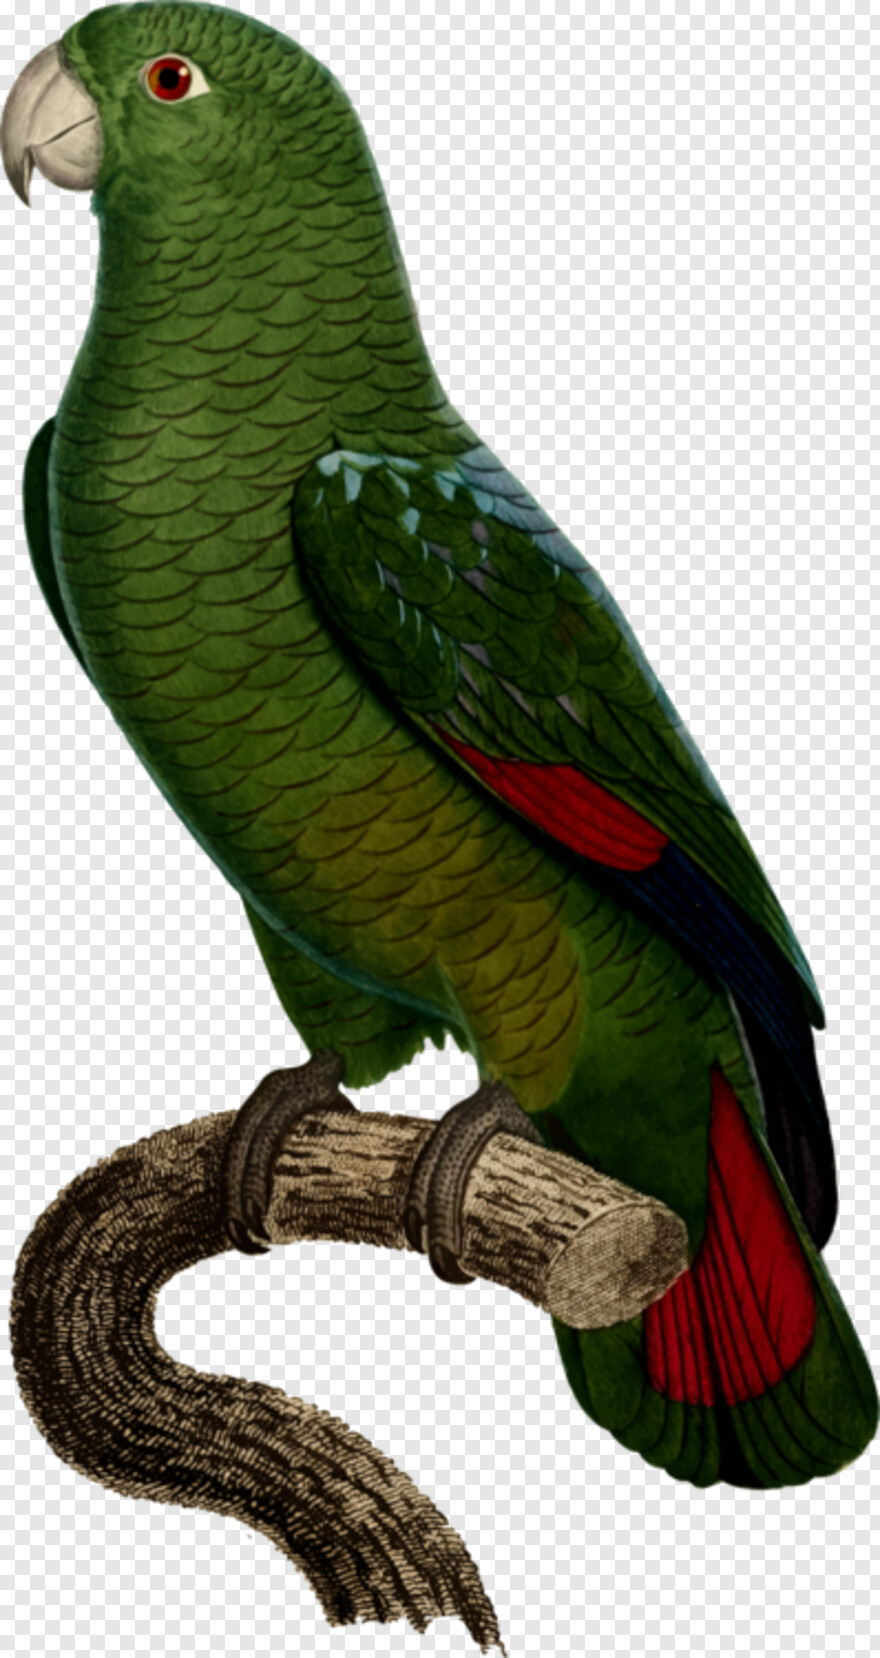 pirate-parrot # 363081